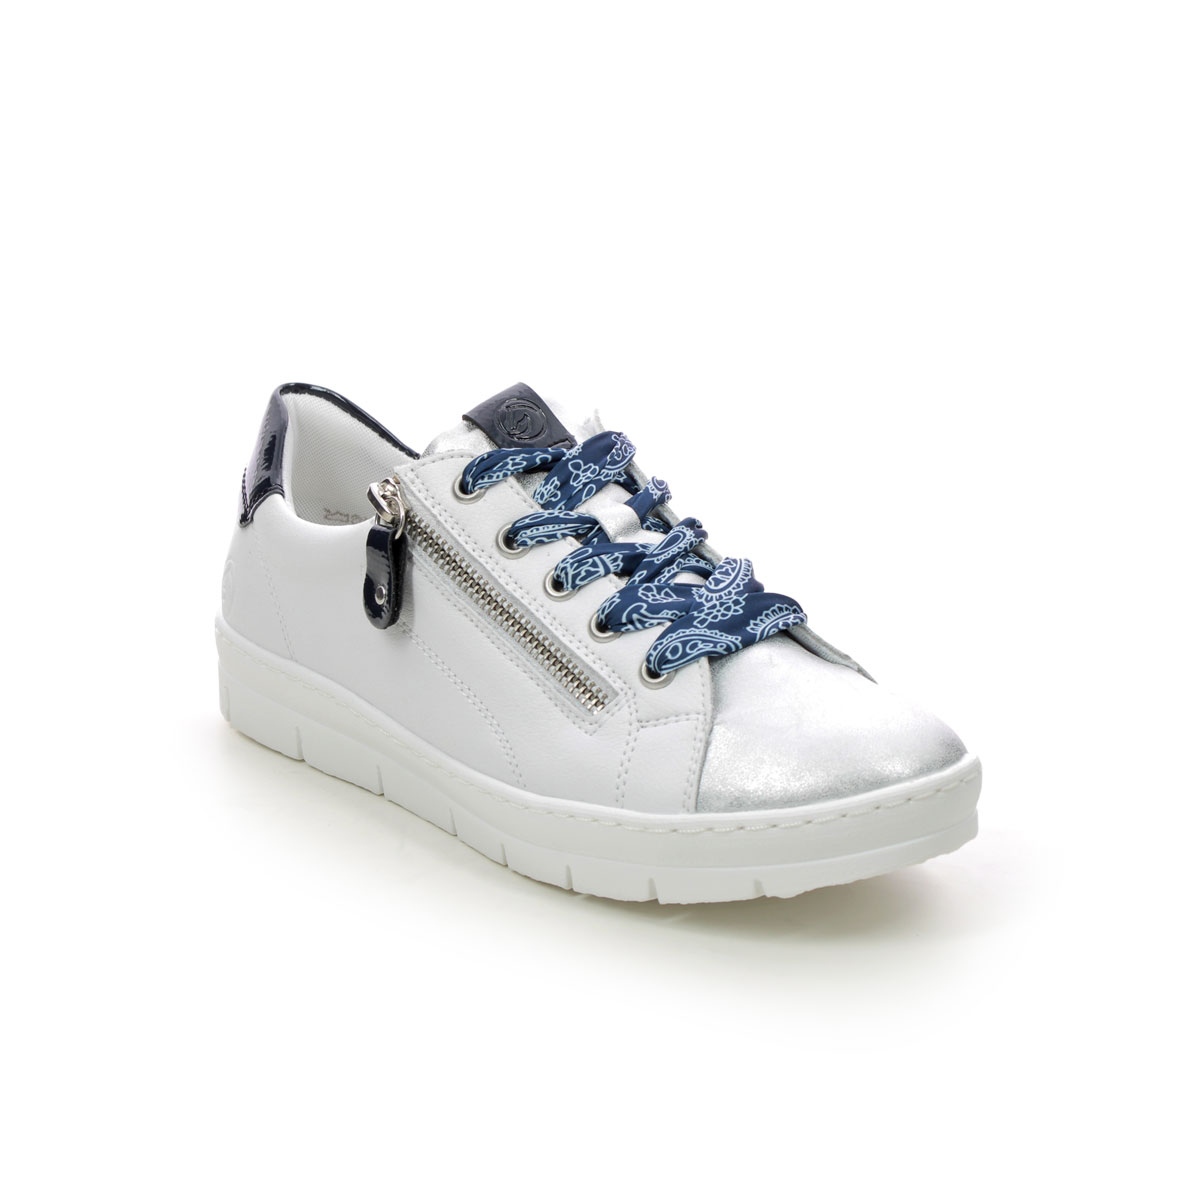 Remonte Ravenna 11 White Navy  Womens Trainers D5825-80 In Size 41 In Plain White Navy